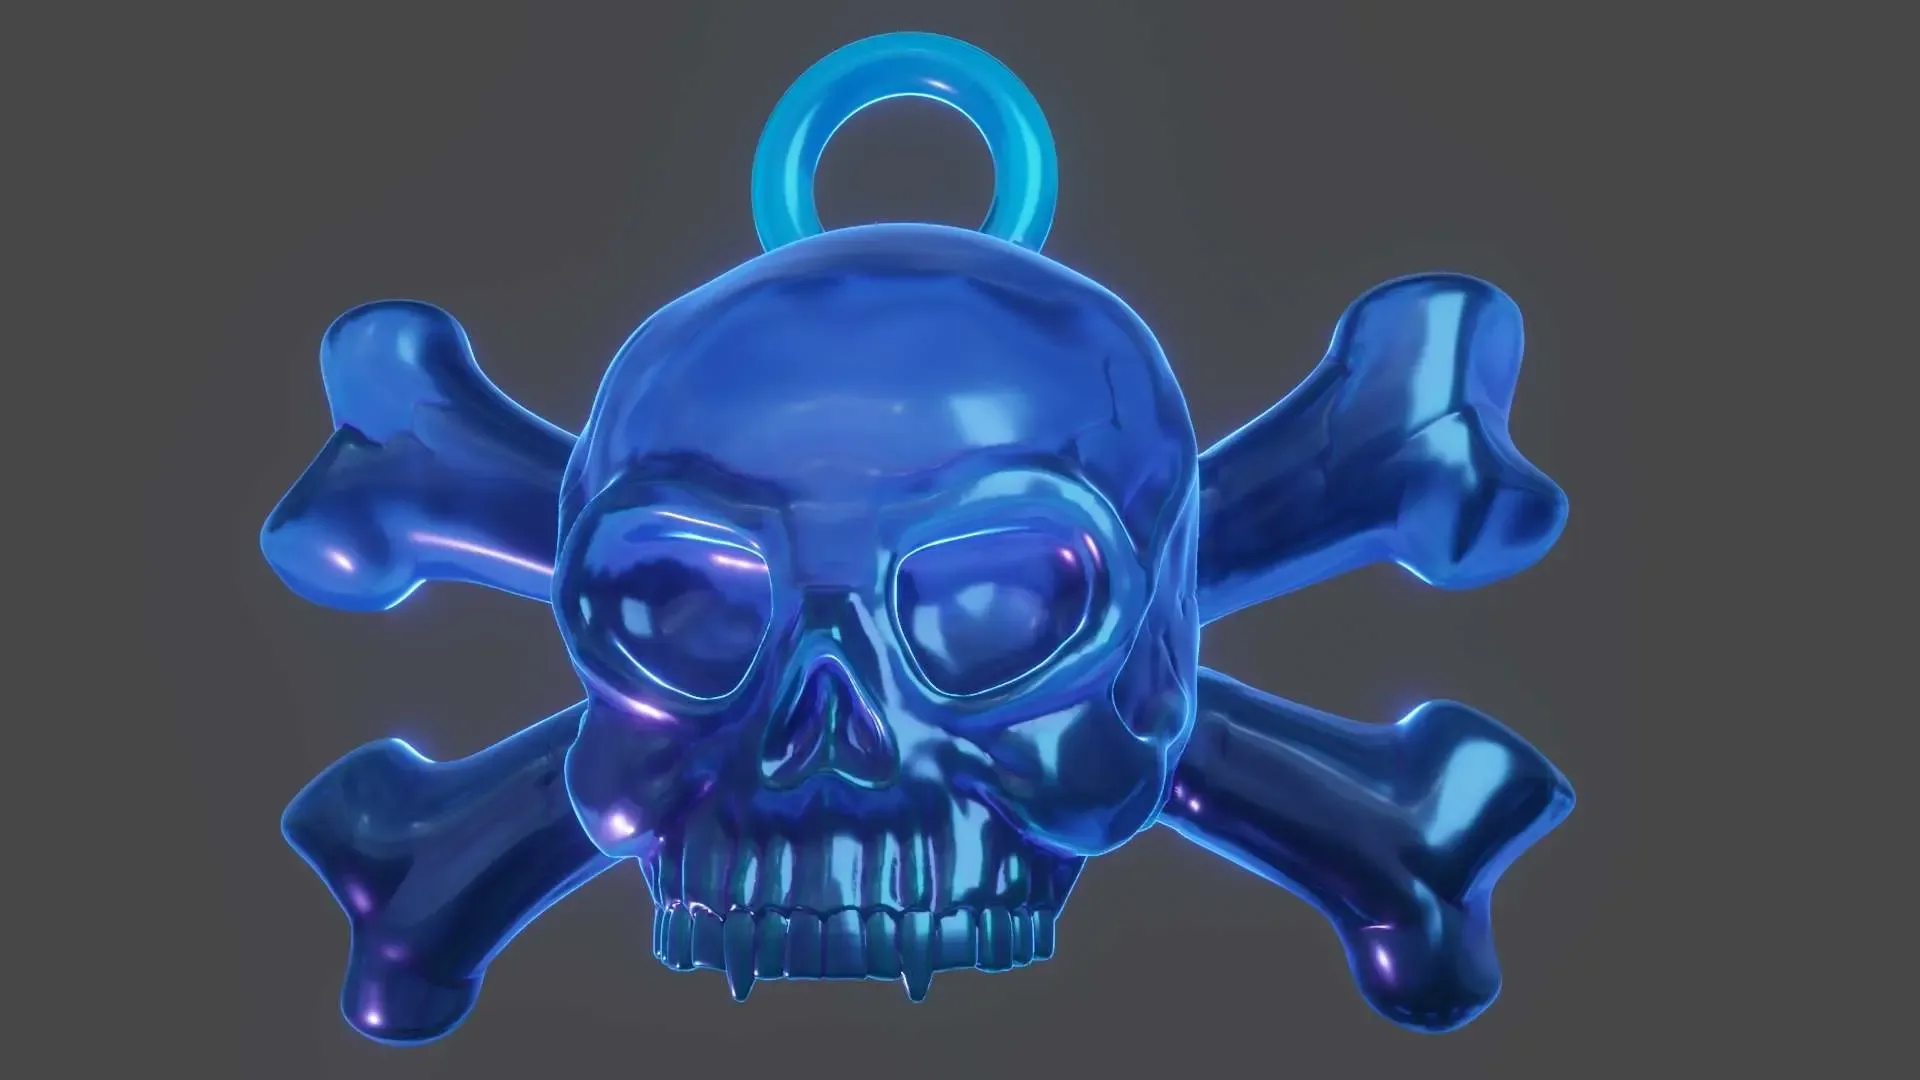 Pirate Skull Pendant for Liontin or Keychain